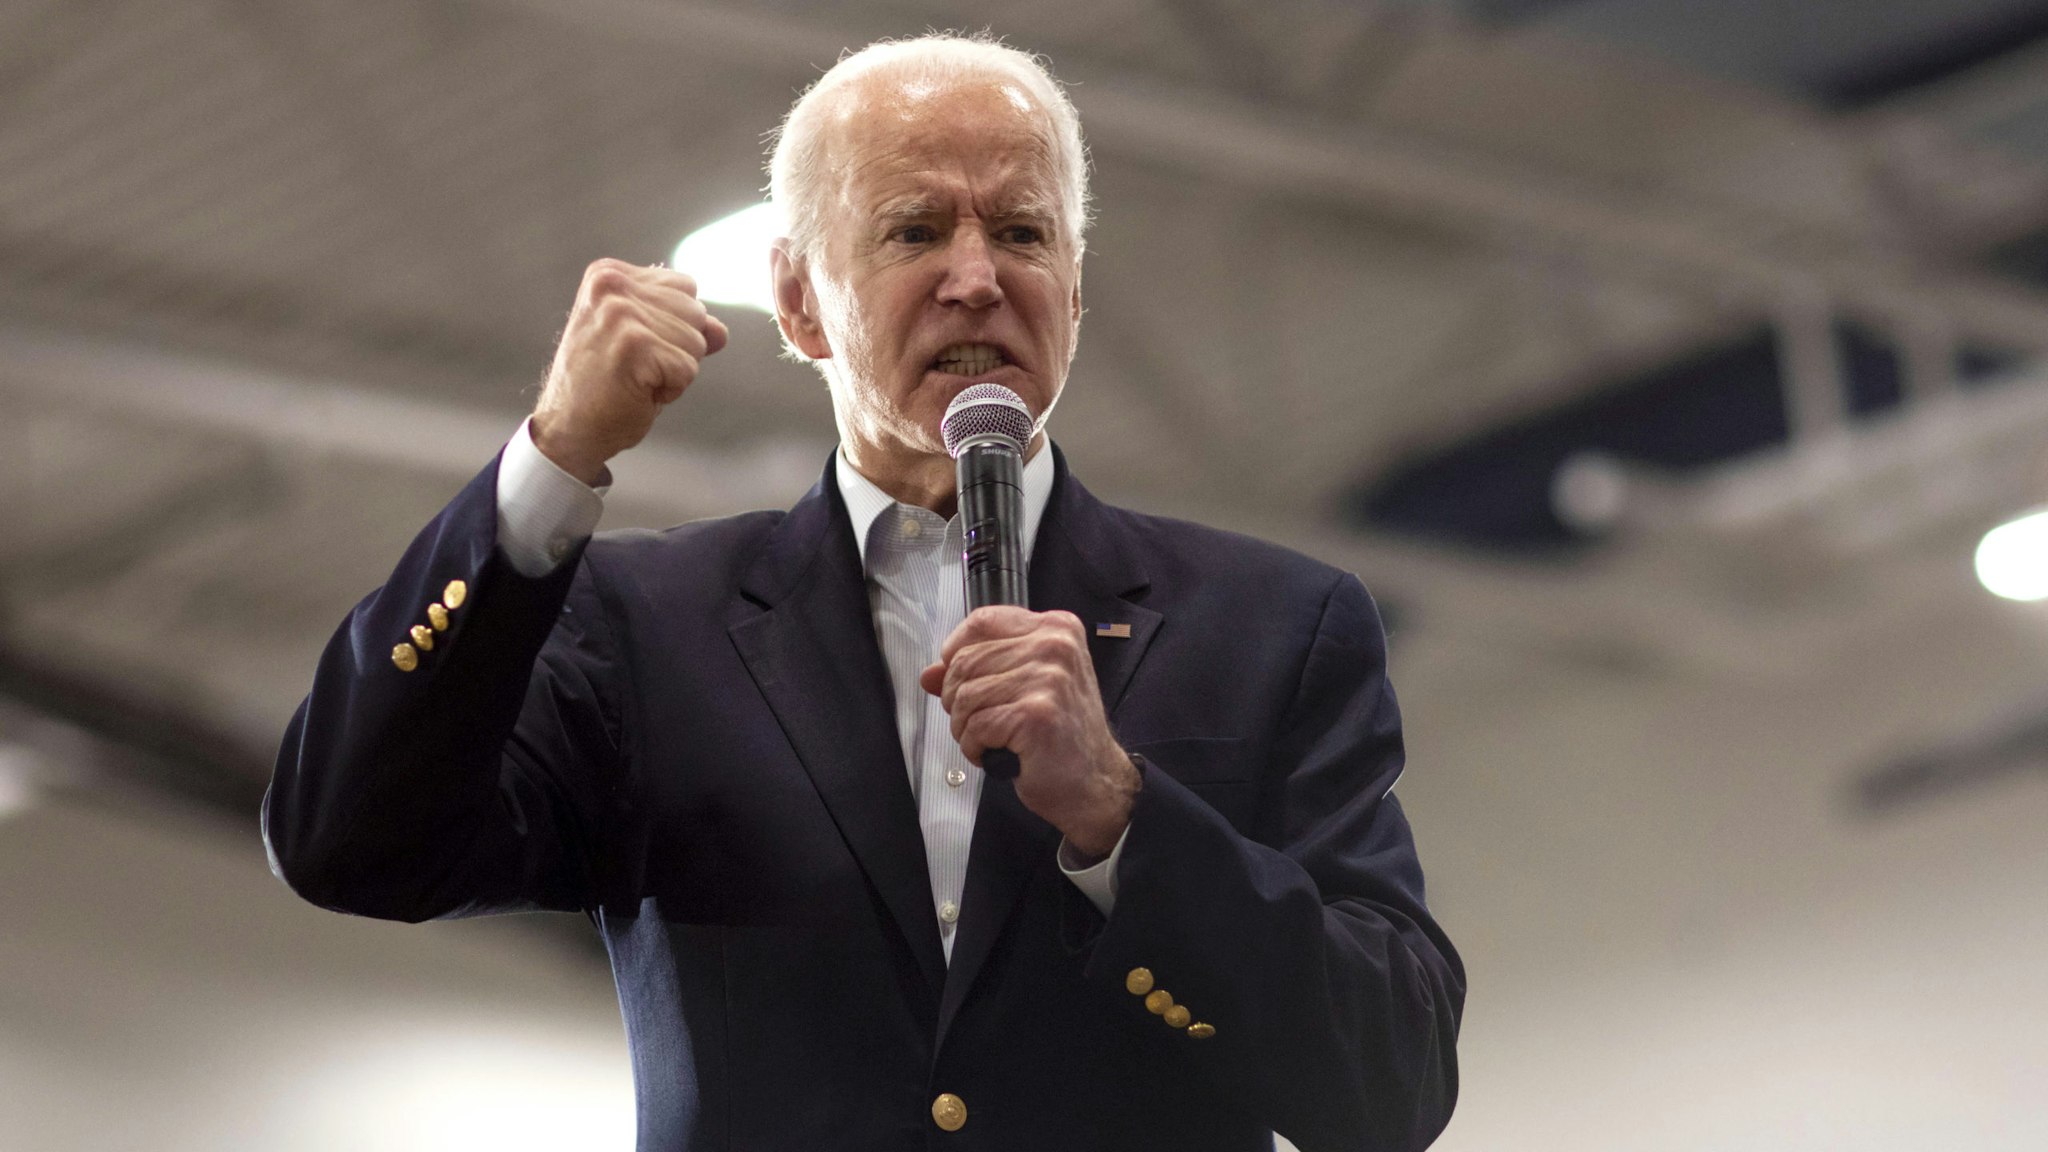 Former U.S. Vice President Joe Biden, 2020 Democratic presidential candidate, speaks during a campaign event in Des Moines, Iowa, U.S., on Sunday, Feb. 2, 2020. Biden is opening a daunting lead over the rest of the field in the March 3 Texas primary, but his advantage has slipped in South Carolina, where the primary later this month is crucial for his campaign.